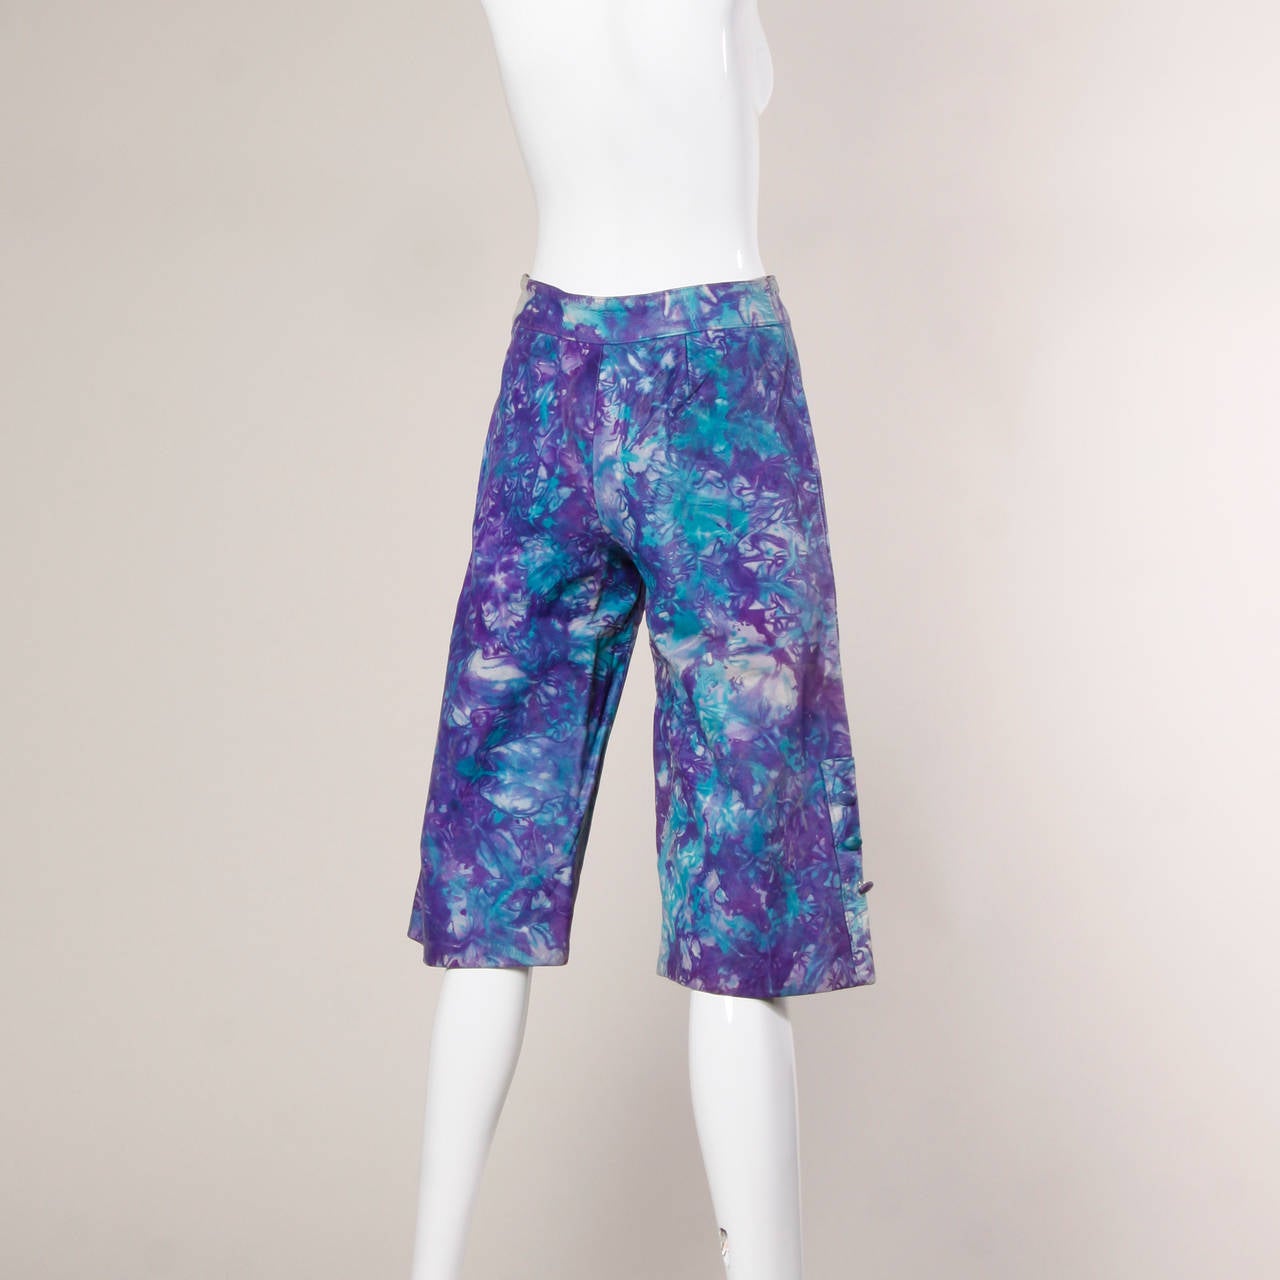 1970s Vintage Hand-Painted Leather Marbled Tie Dye Shorts or Pants 2